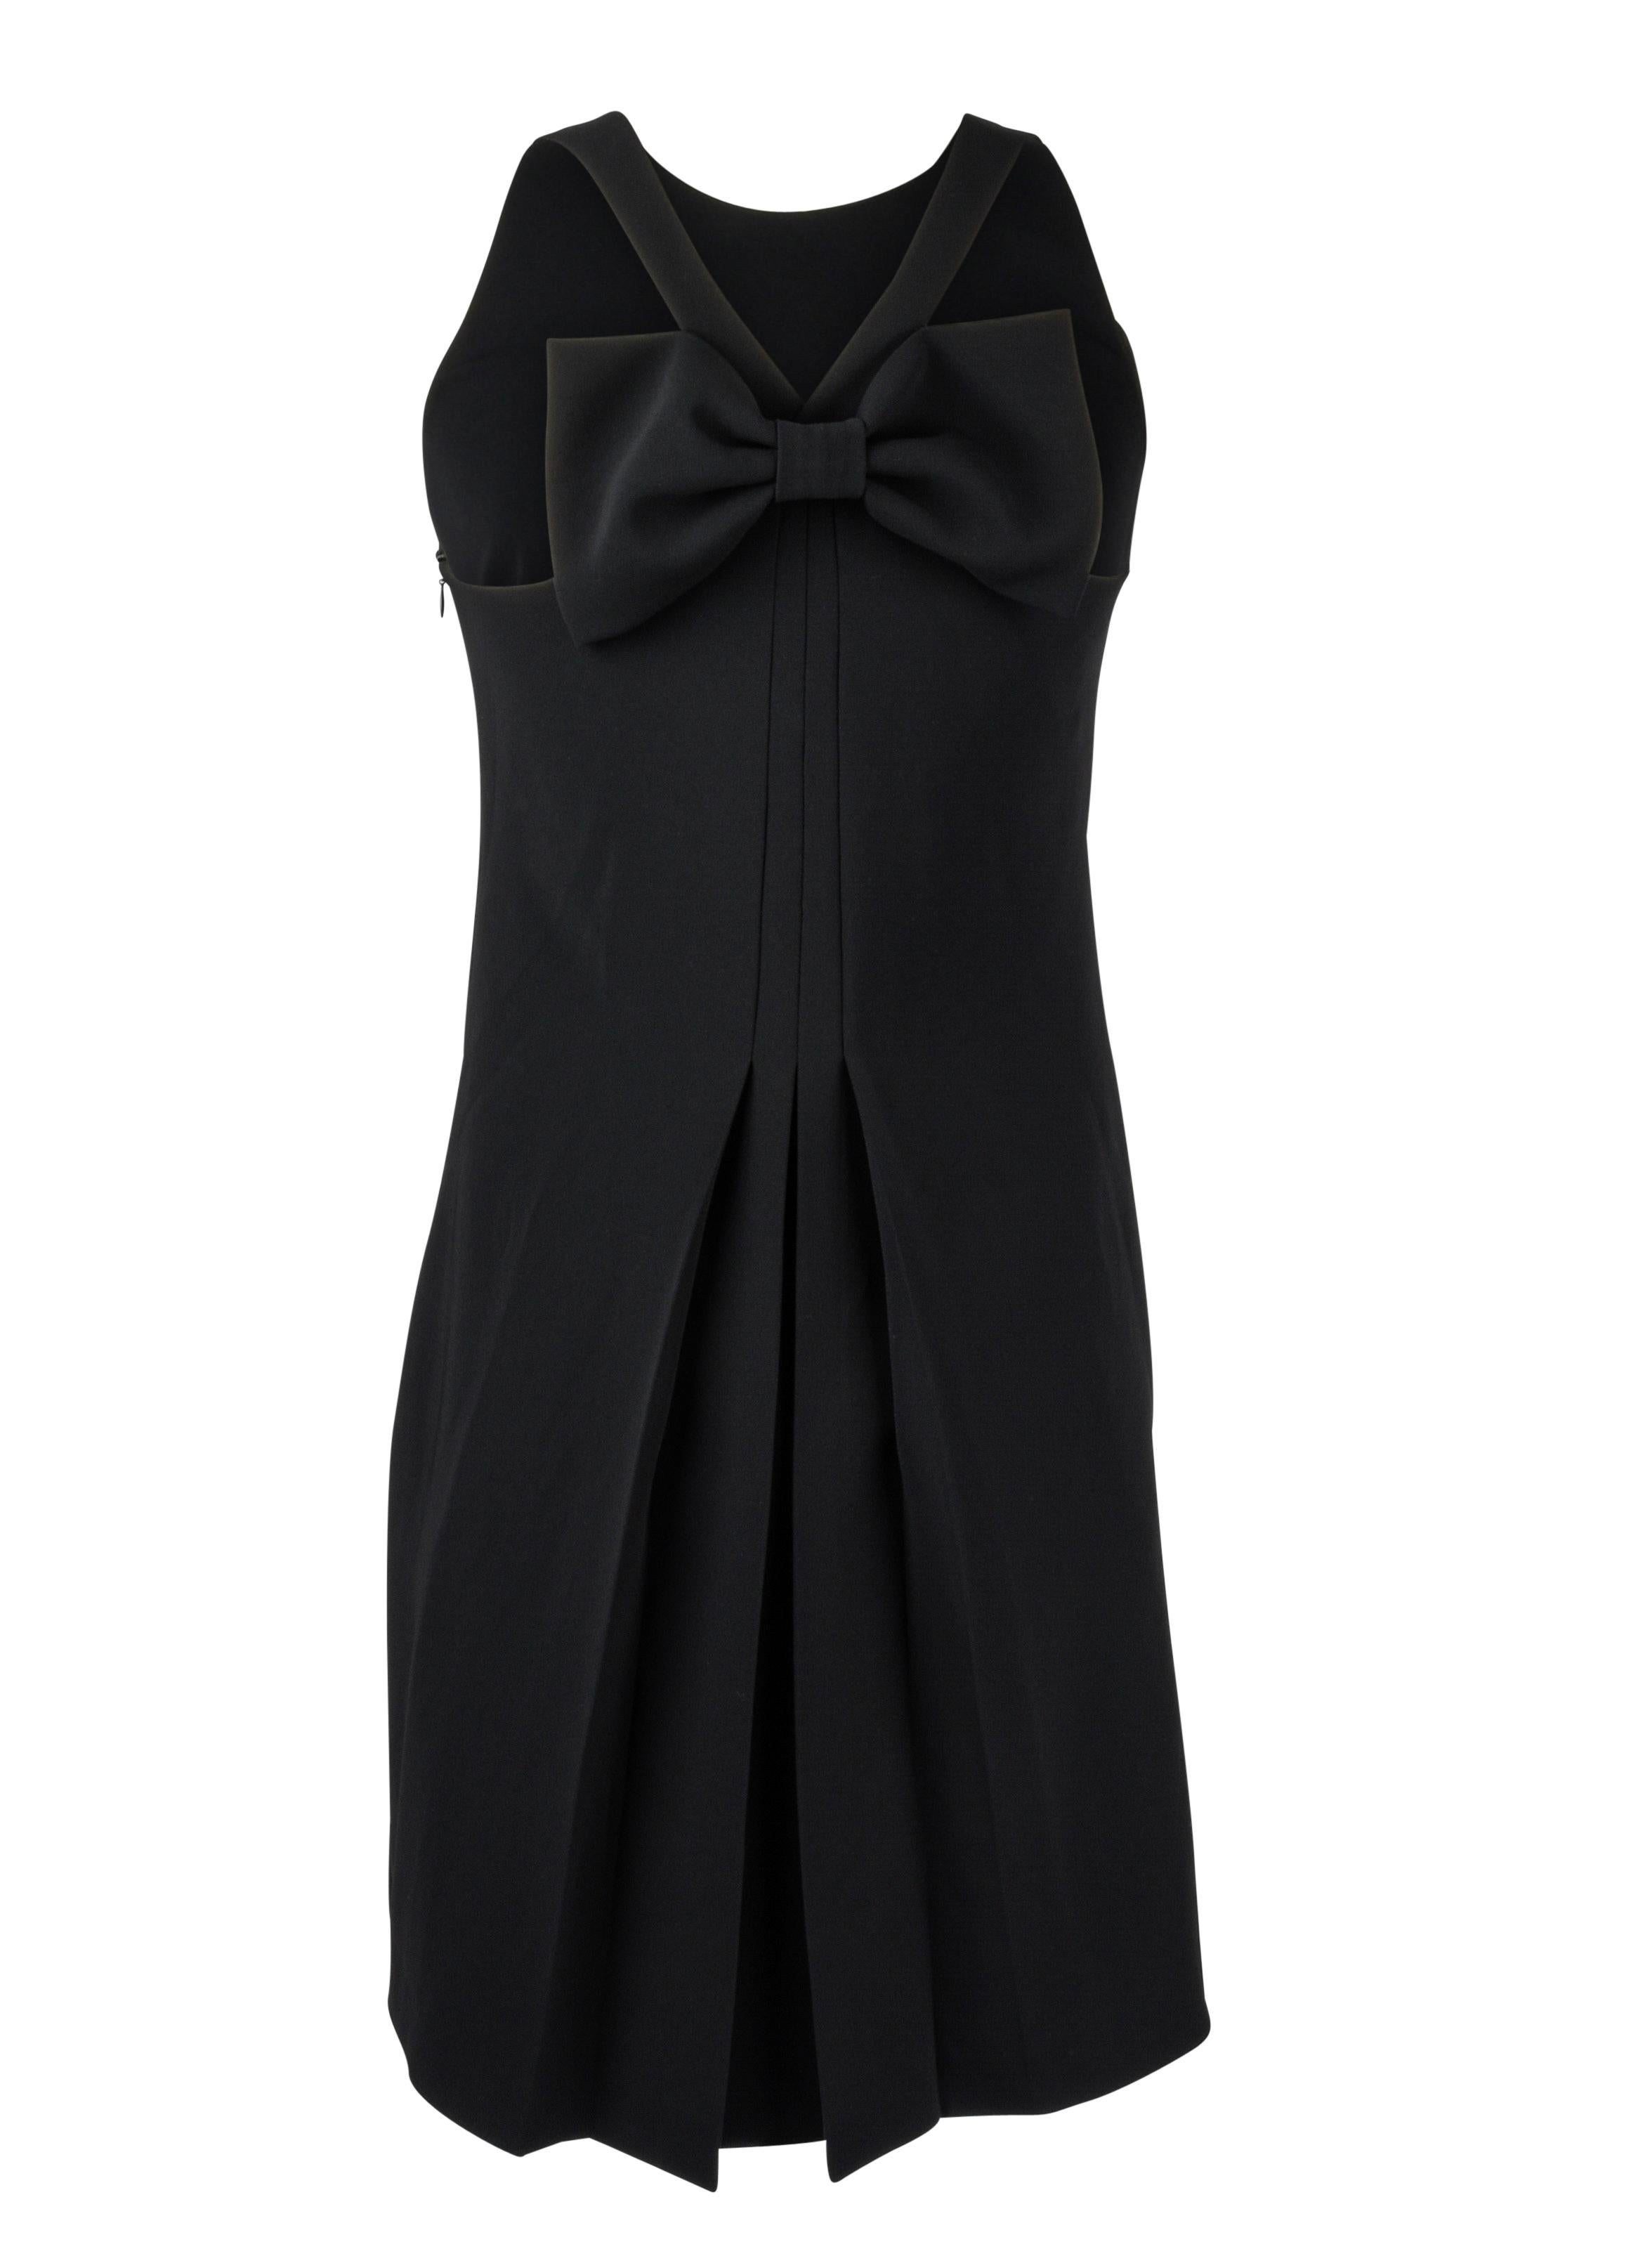 Moschino Dress Black Racer Cut Shoulder Rear Bow and Pleat Detail 42 / 8  4